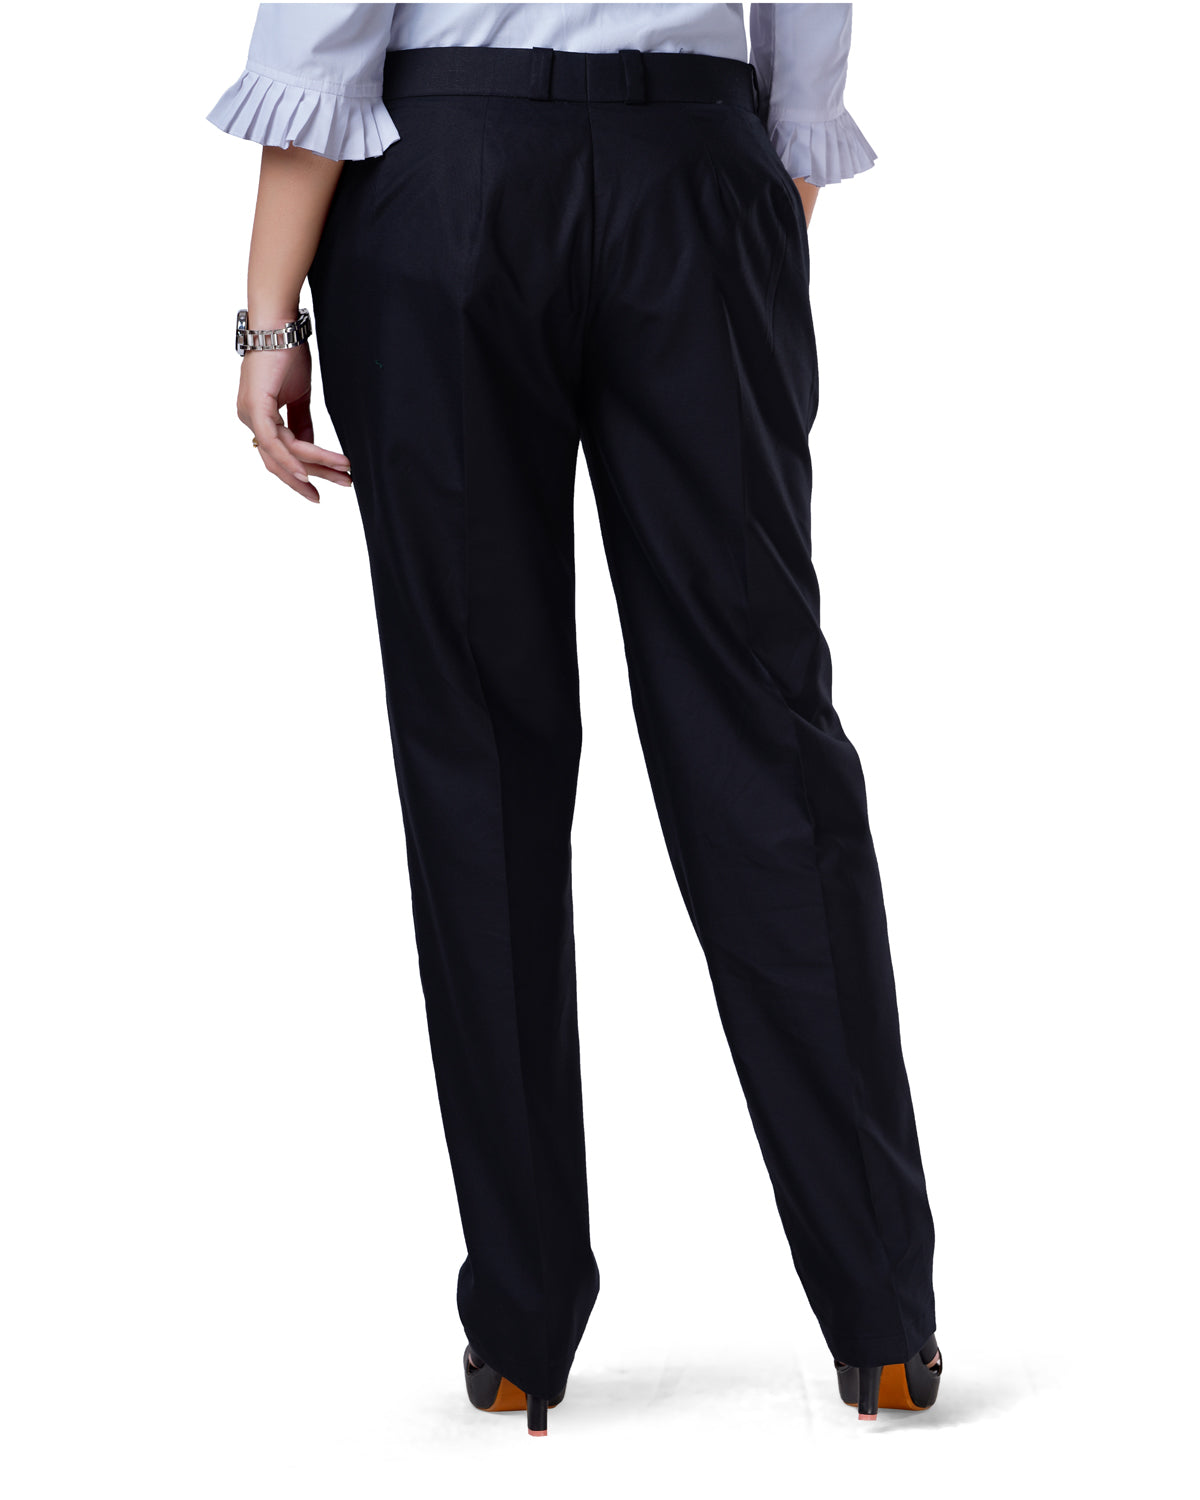 Buy LH Urban Black Solid Formal Trousers Online - 488371 | The Collective